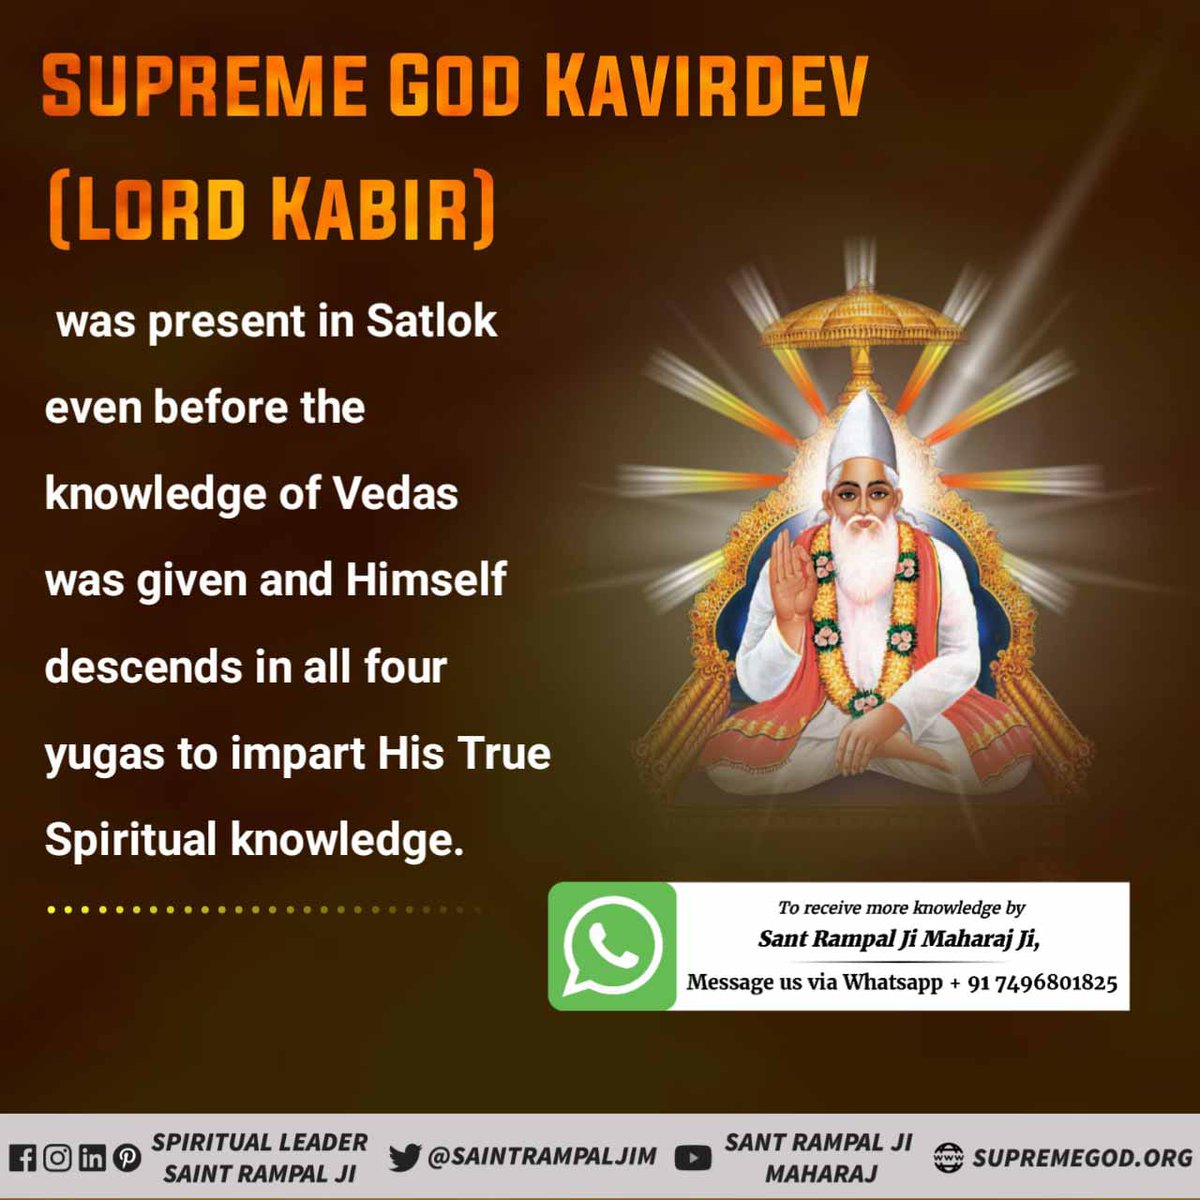 #GodMorningThrusday
Supreme God Kavirdev [Lord Kabir] was present in Satlok even before the knowledge of Vedas was given and himself descends in all four yugas to impart His True Spiritual knowledge.
Bandichhod SatGuru Rampal Ji Maharaj